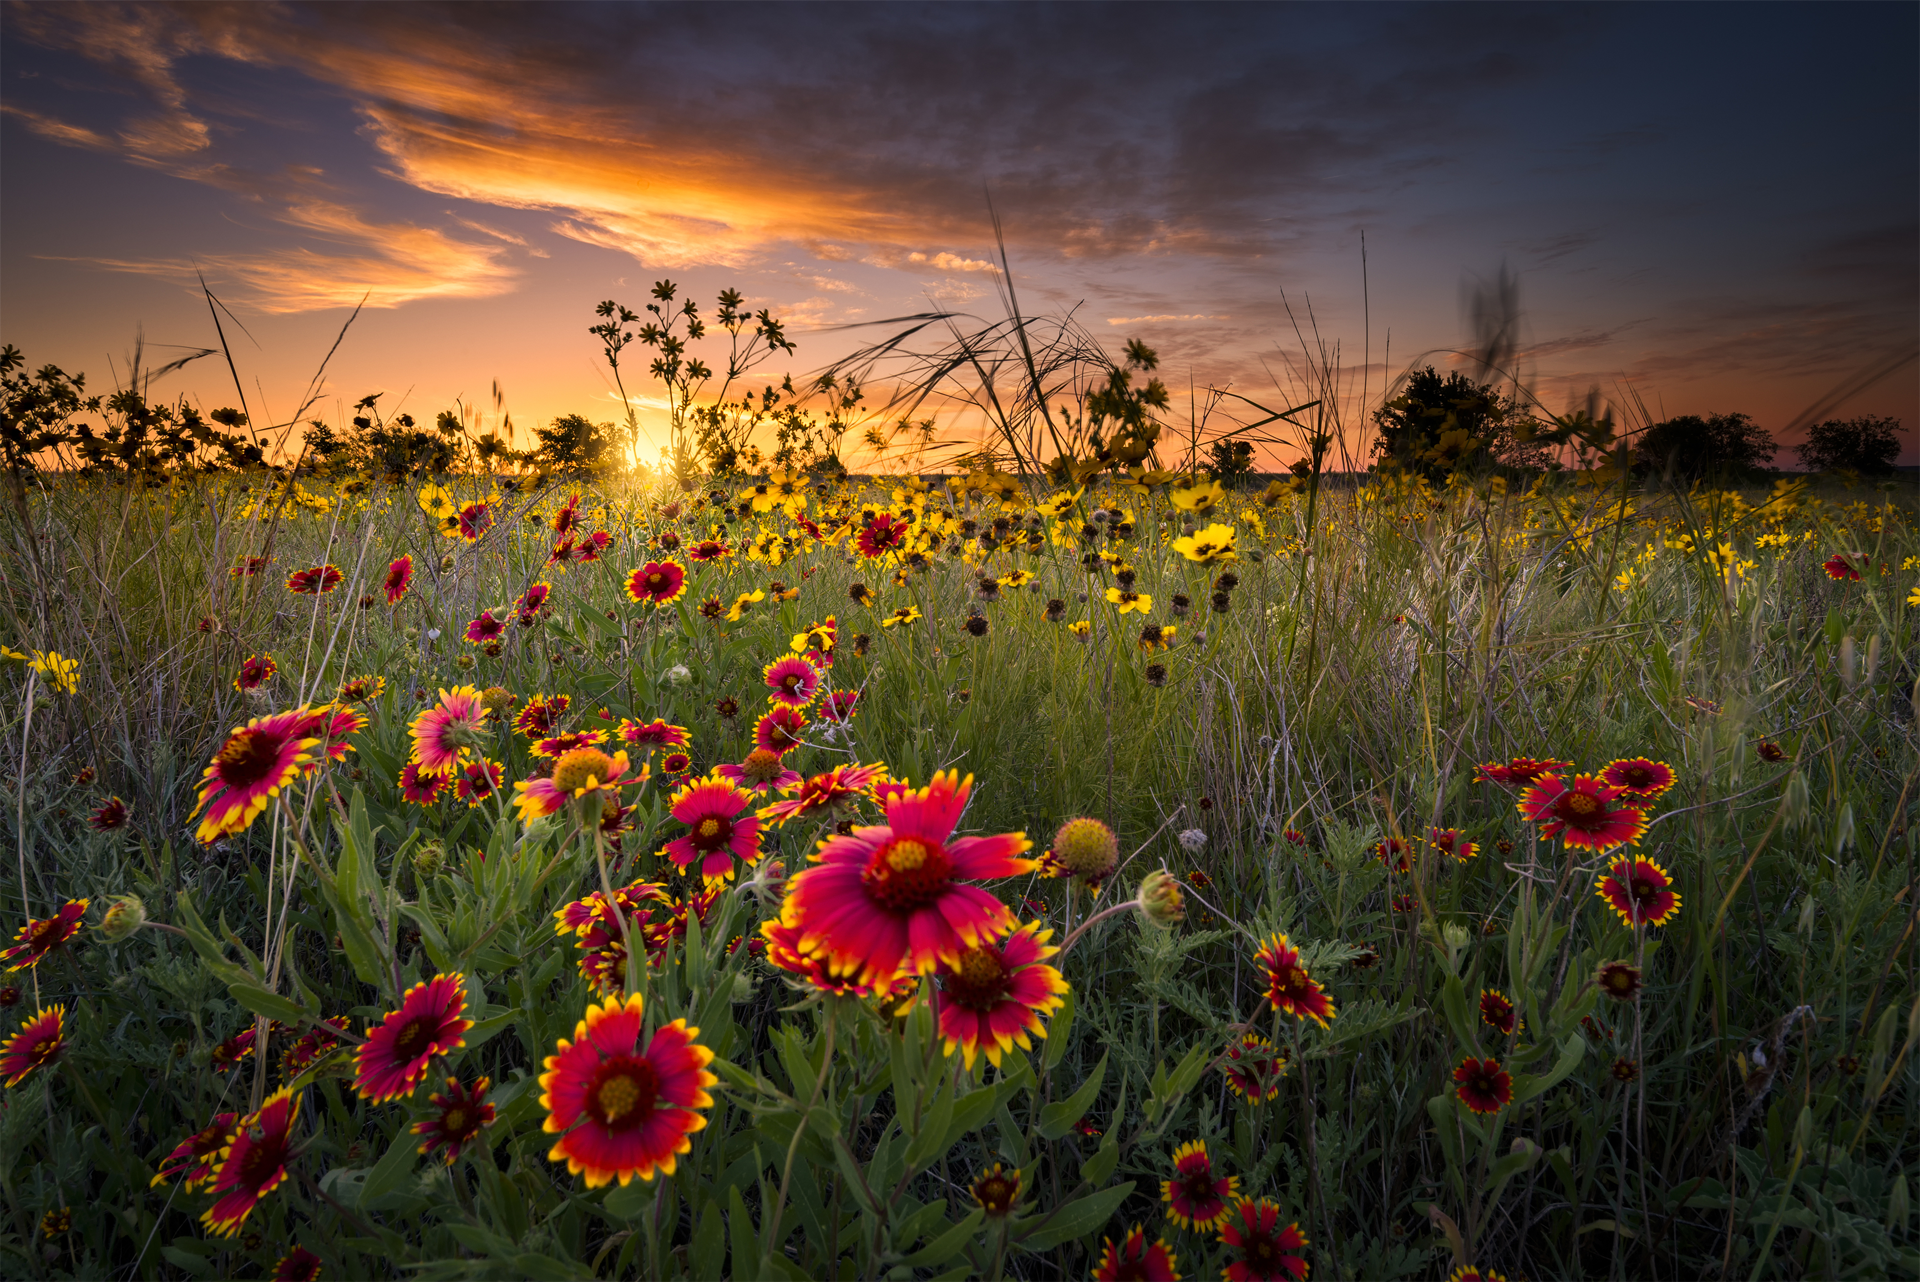 A field of red and yellow flowers with a sunset in the background.